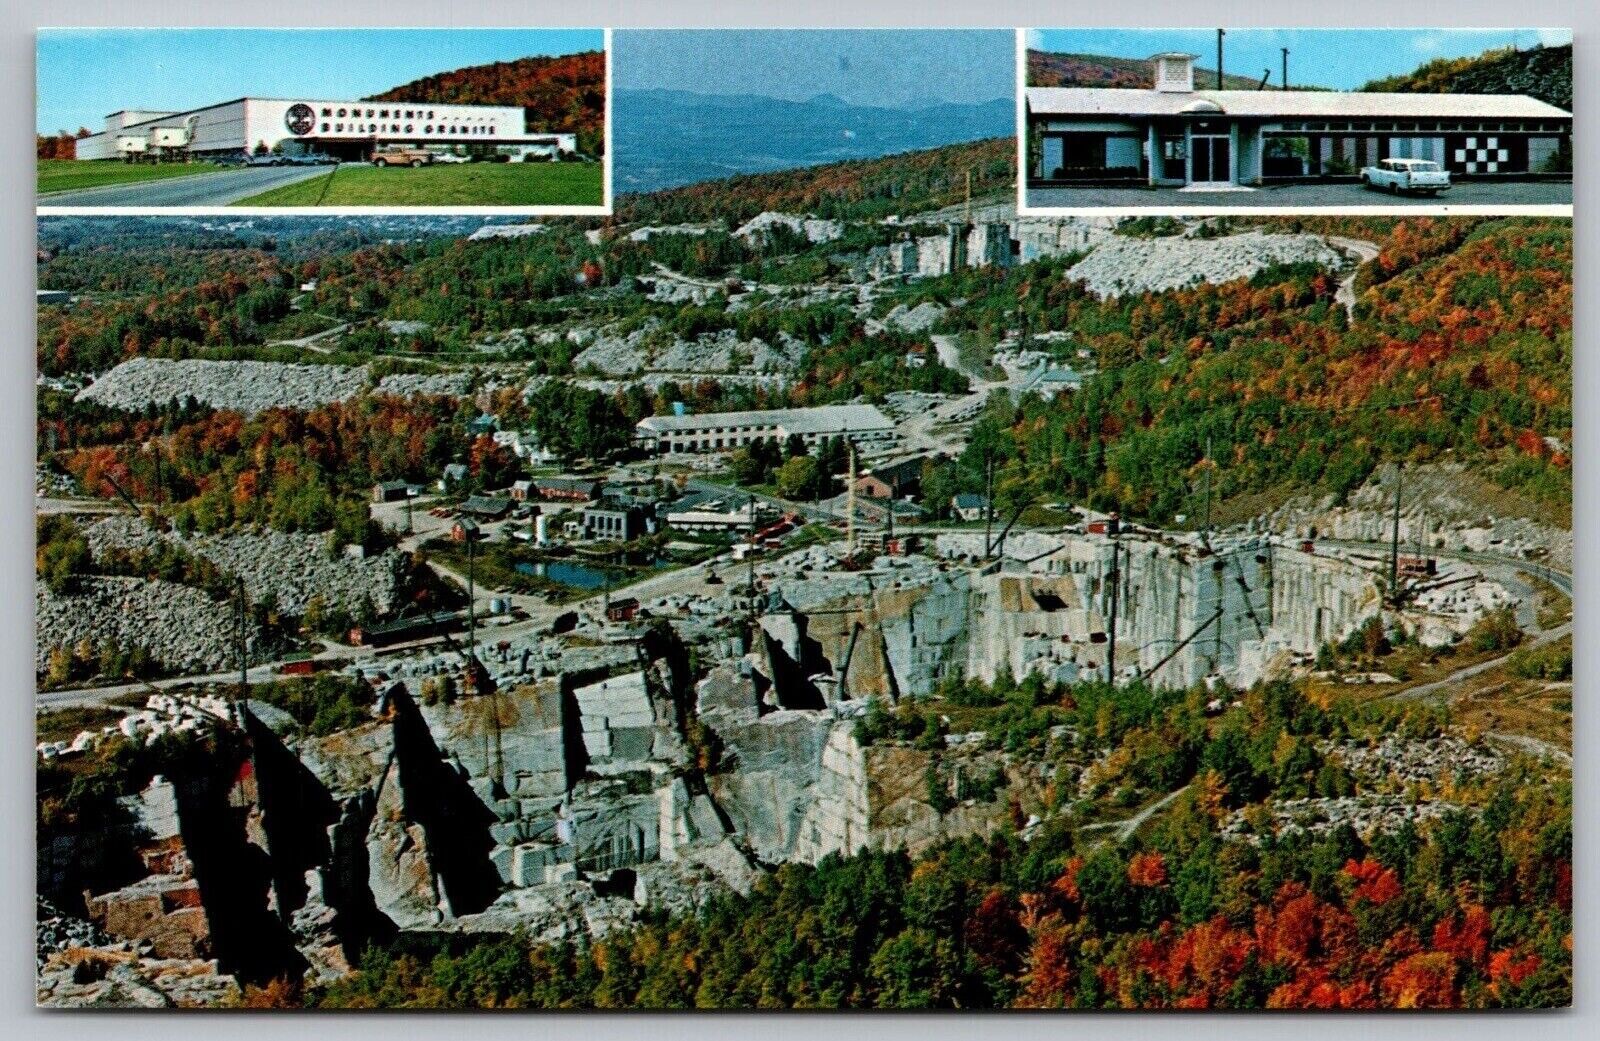 Barre Vermont Rock Of Ages Granite Quarry Multi View Aerial View Chrome Postcard